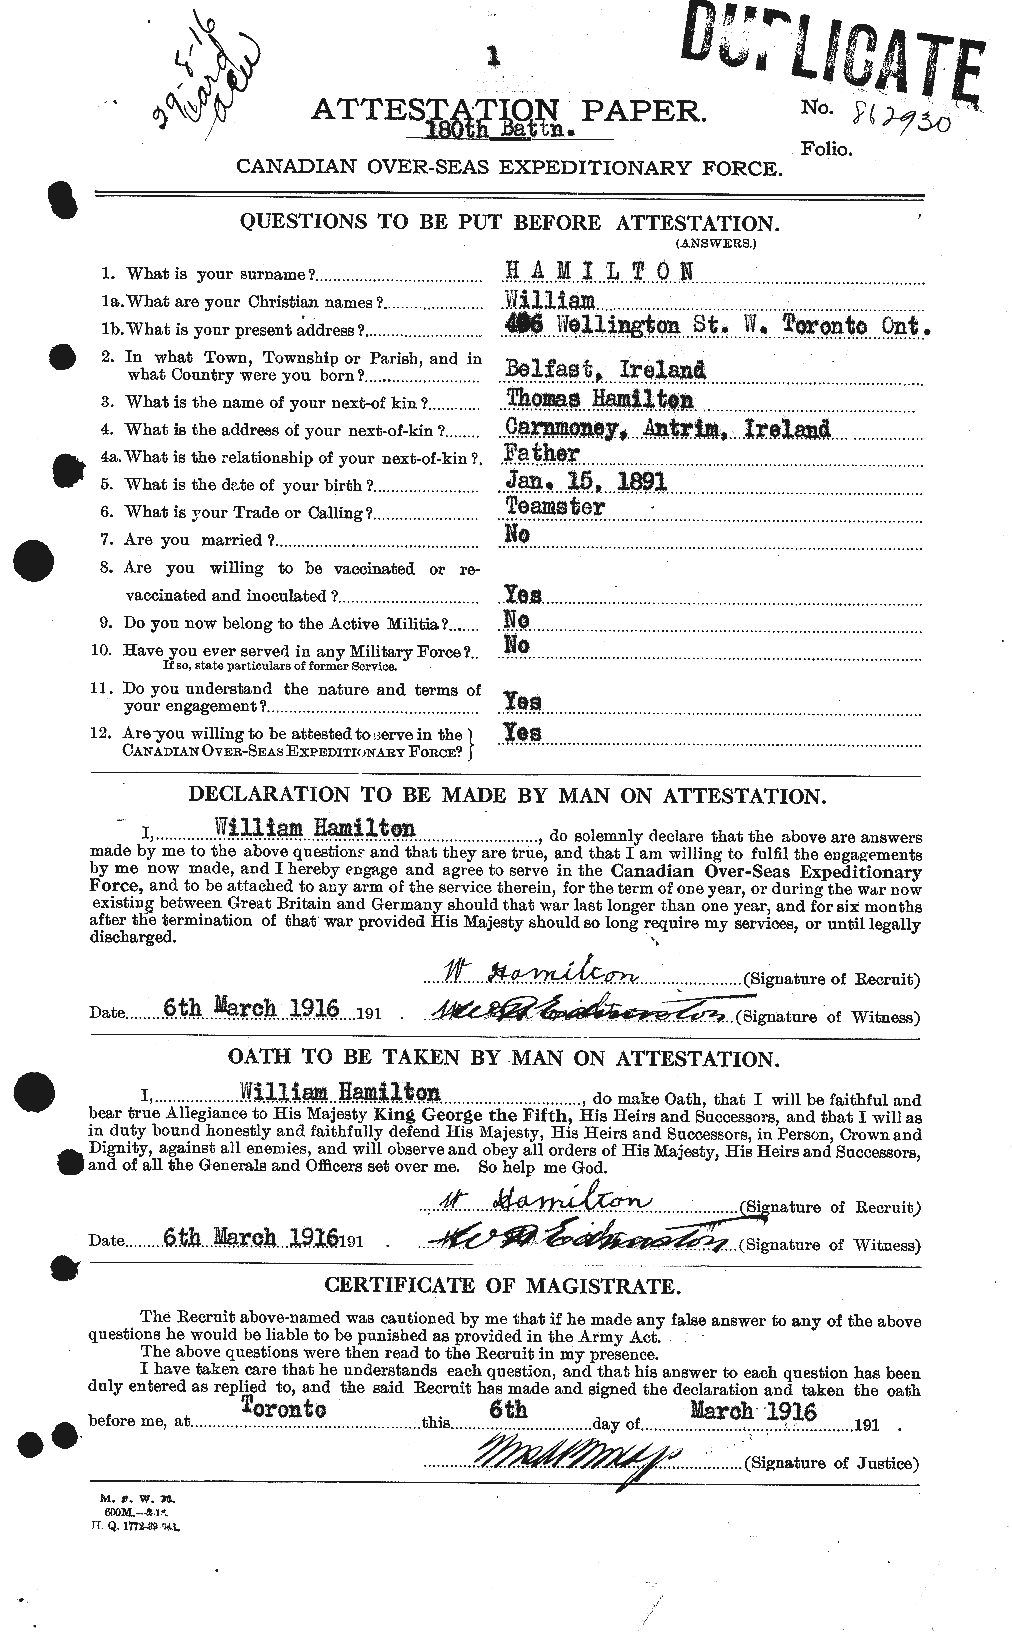 Personnel Records of the First World War - CEF 374853a